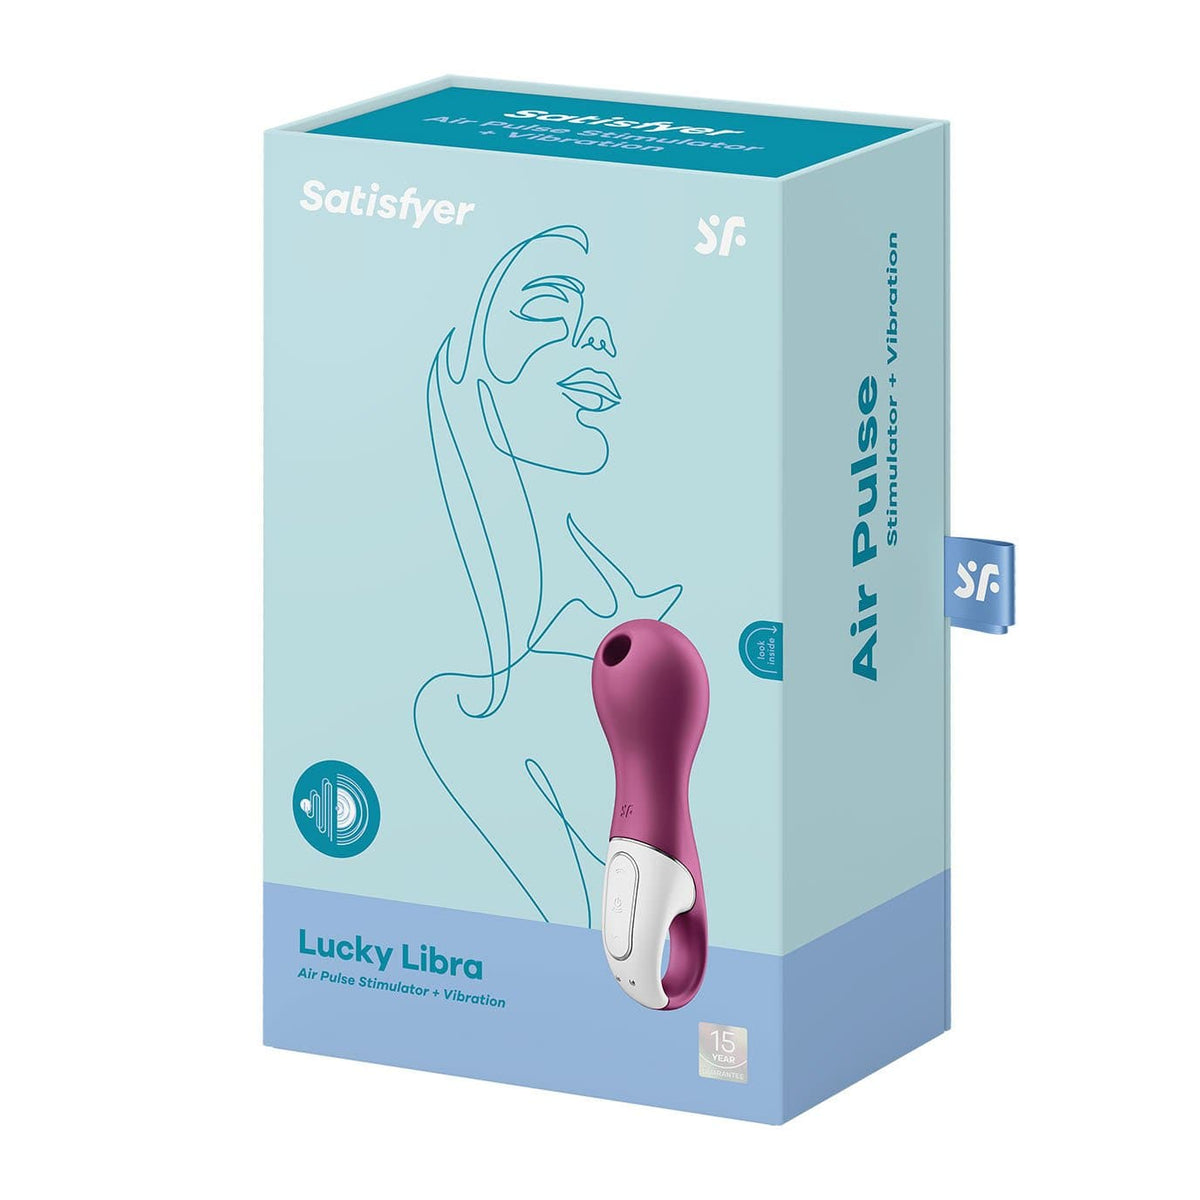 Satisfyer - Lucky Libra Air Pulse Clitoral Air Stimulator (Berry) Clit Massager (Vibration) Rechargeable 520219315 CherryAffairs